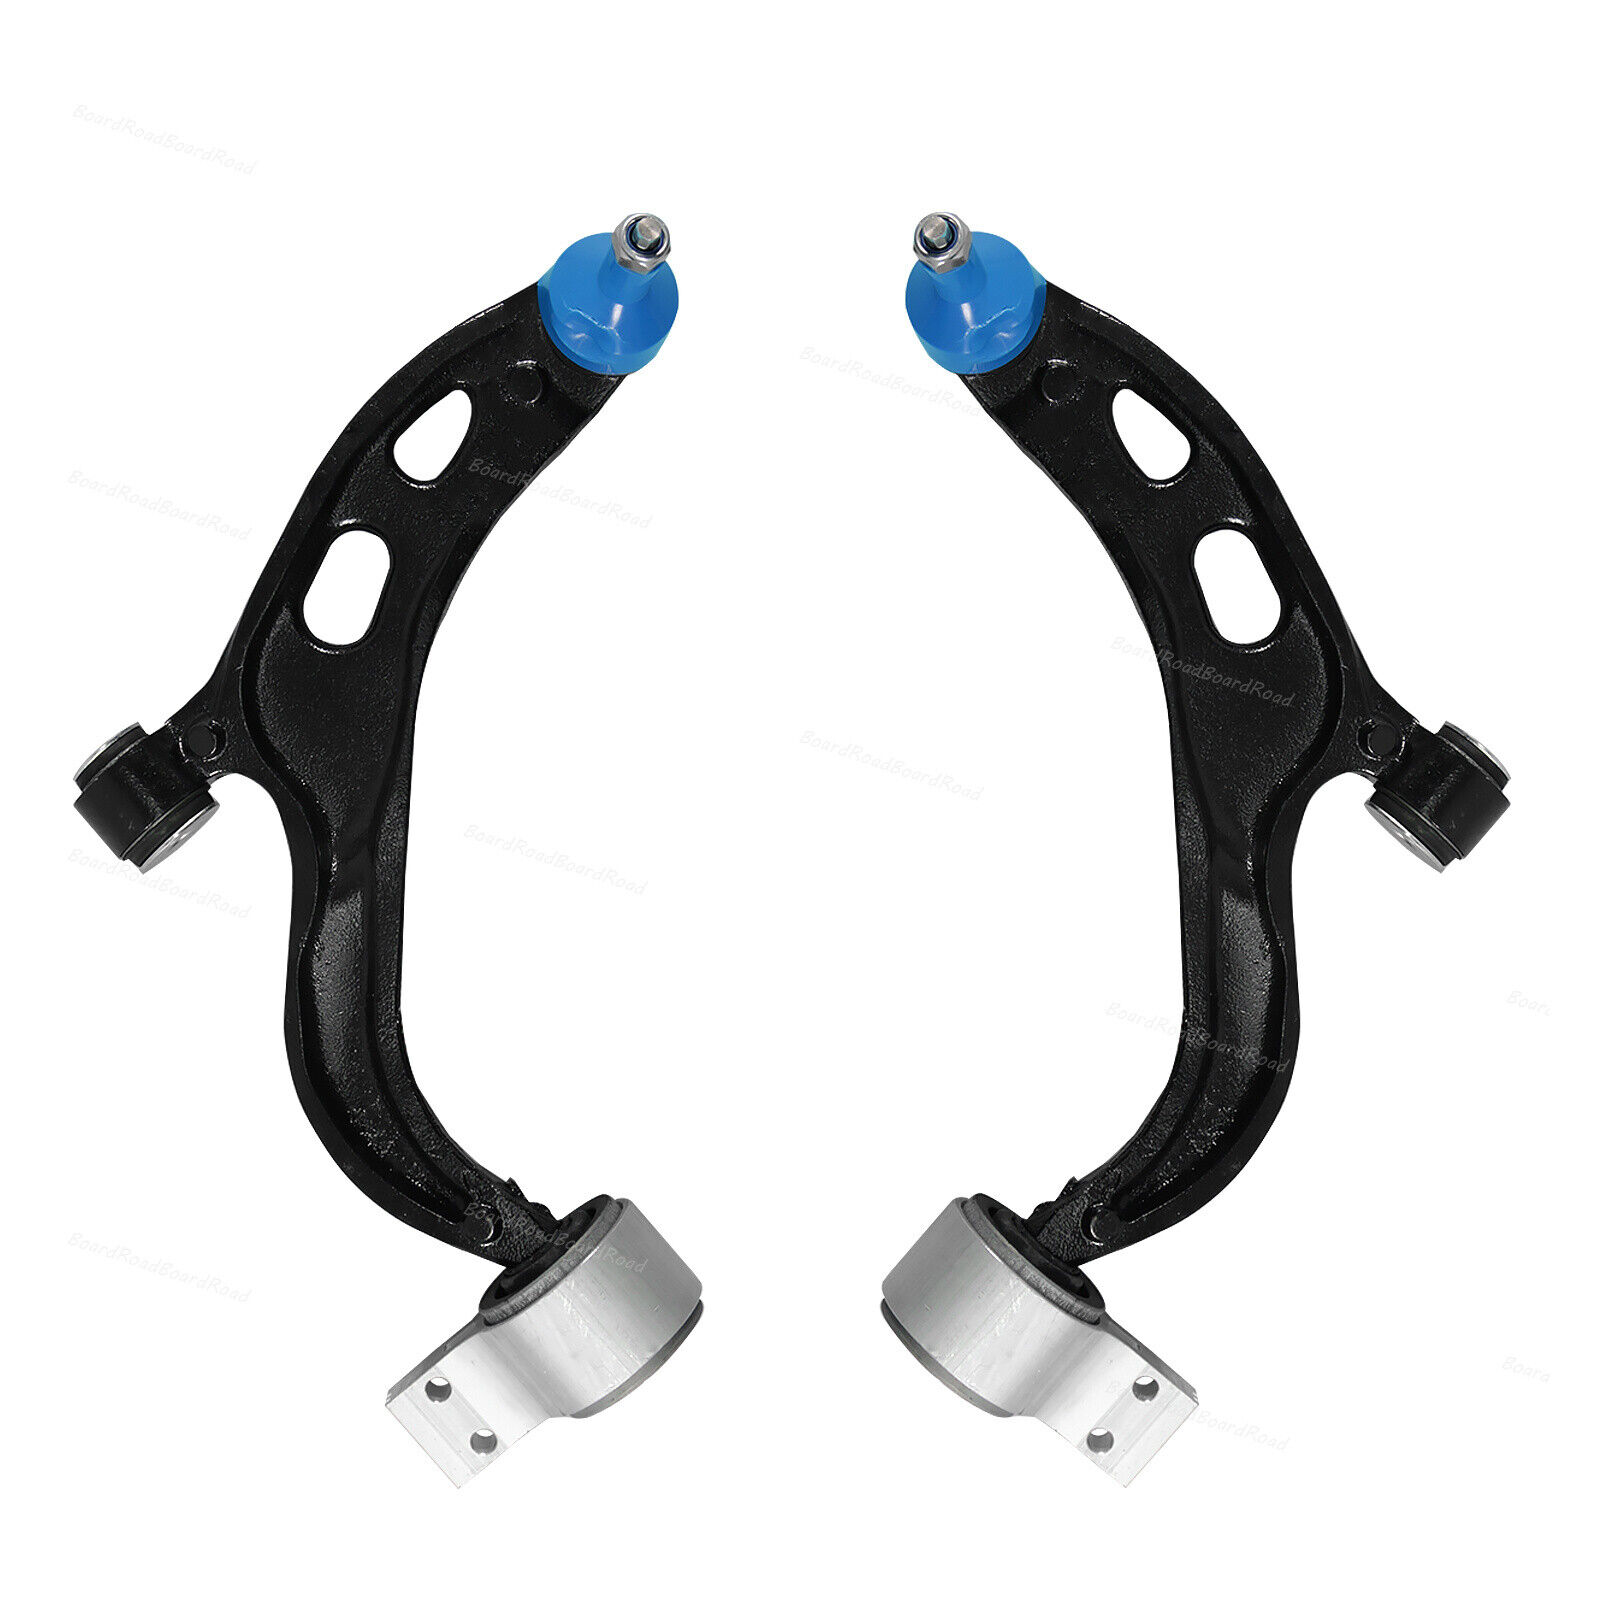 2PCS Front Lower Control Arms Kit For 2010-2012 Ford Taurus Flex Lincoln MKS MKT